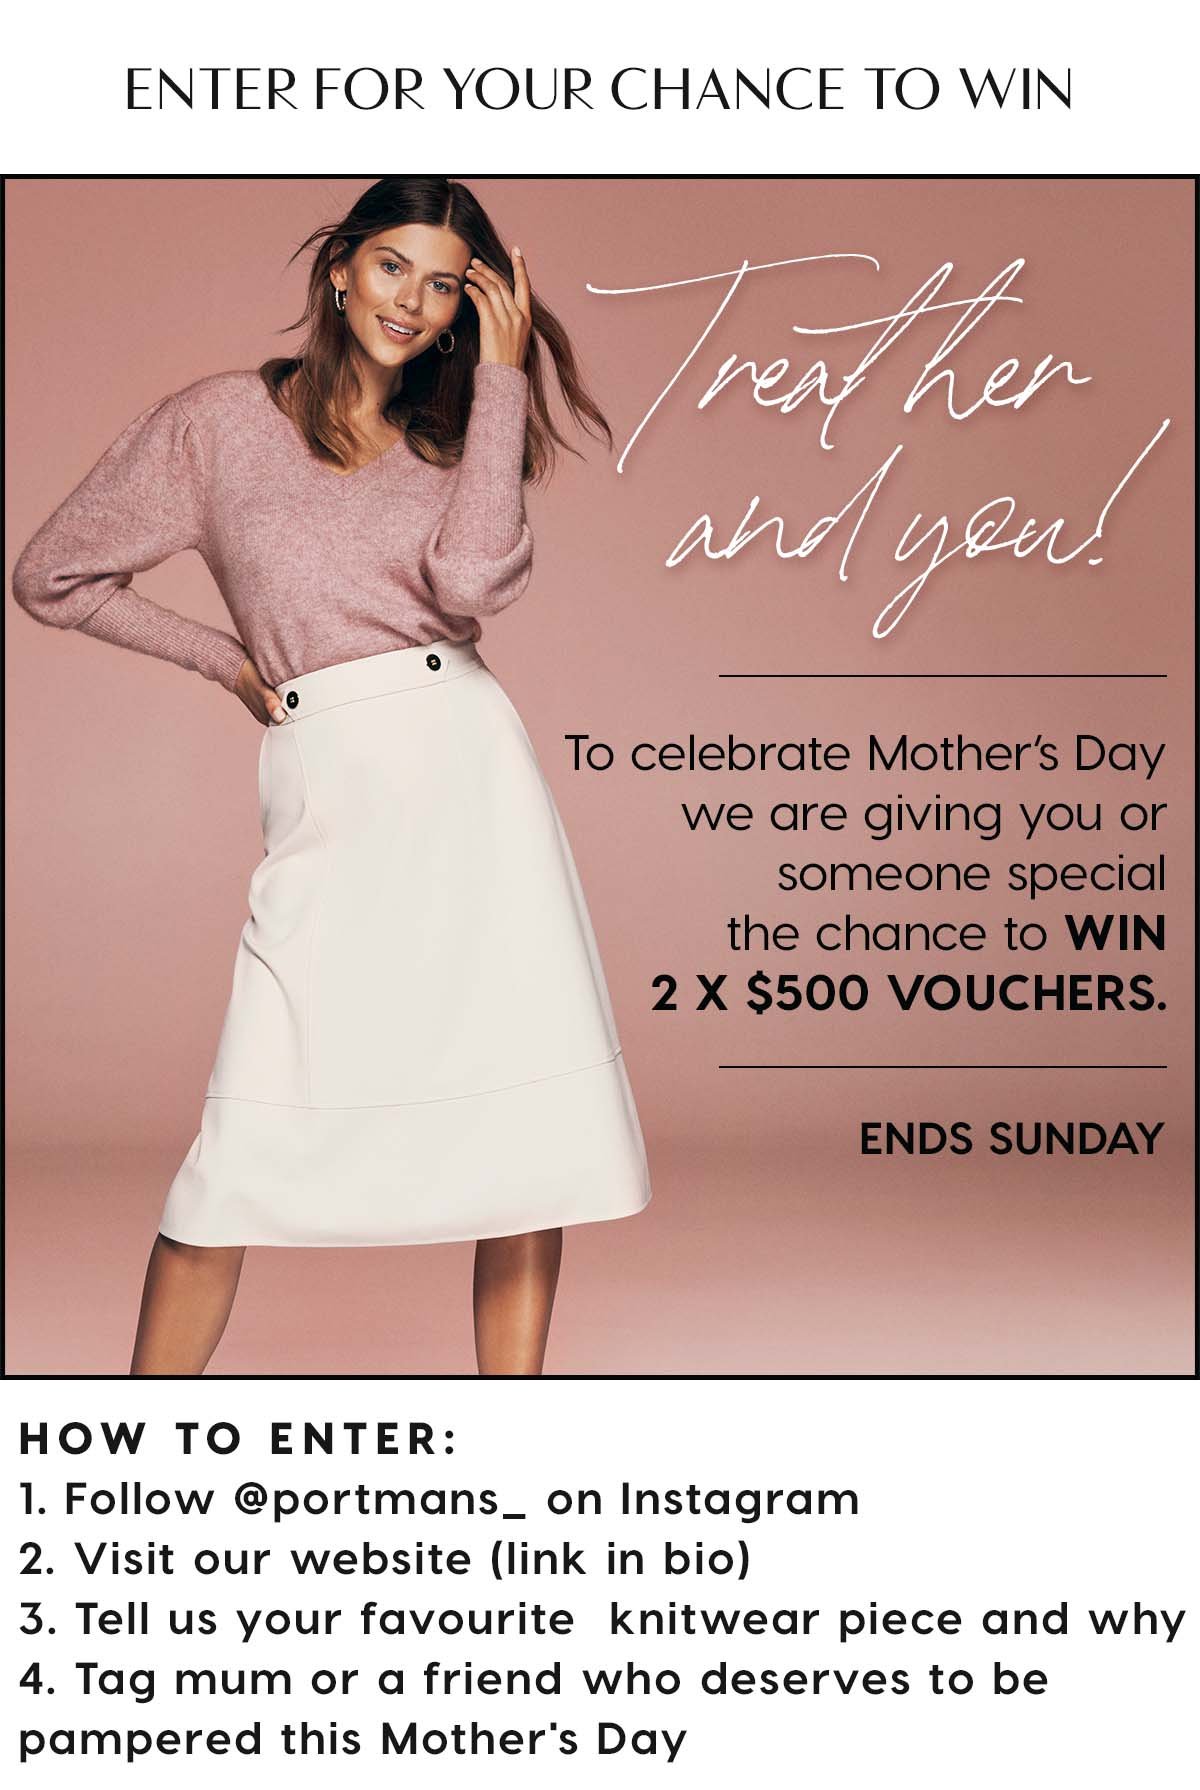 Enter For Your Chance To Win. Treat Her & You! To celebrate Mother's Day we are gicing you or a special someone the chance to WIN 2 x $500 VOUCHERS. Ends Sunday.